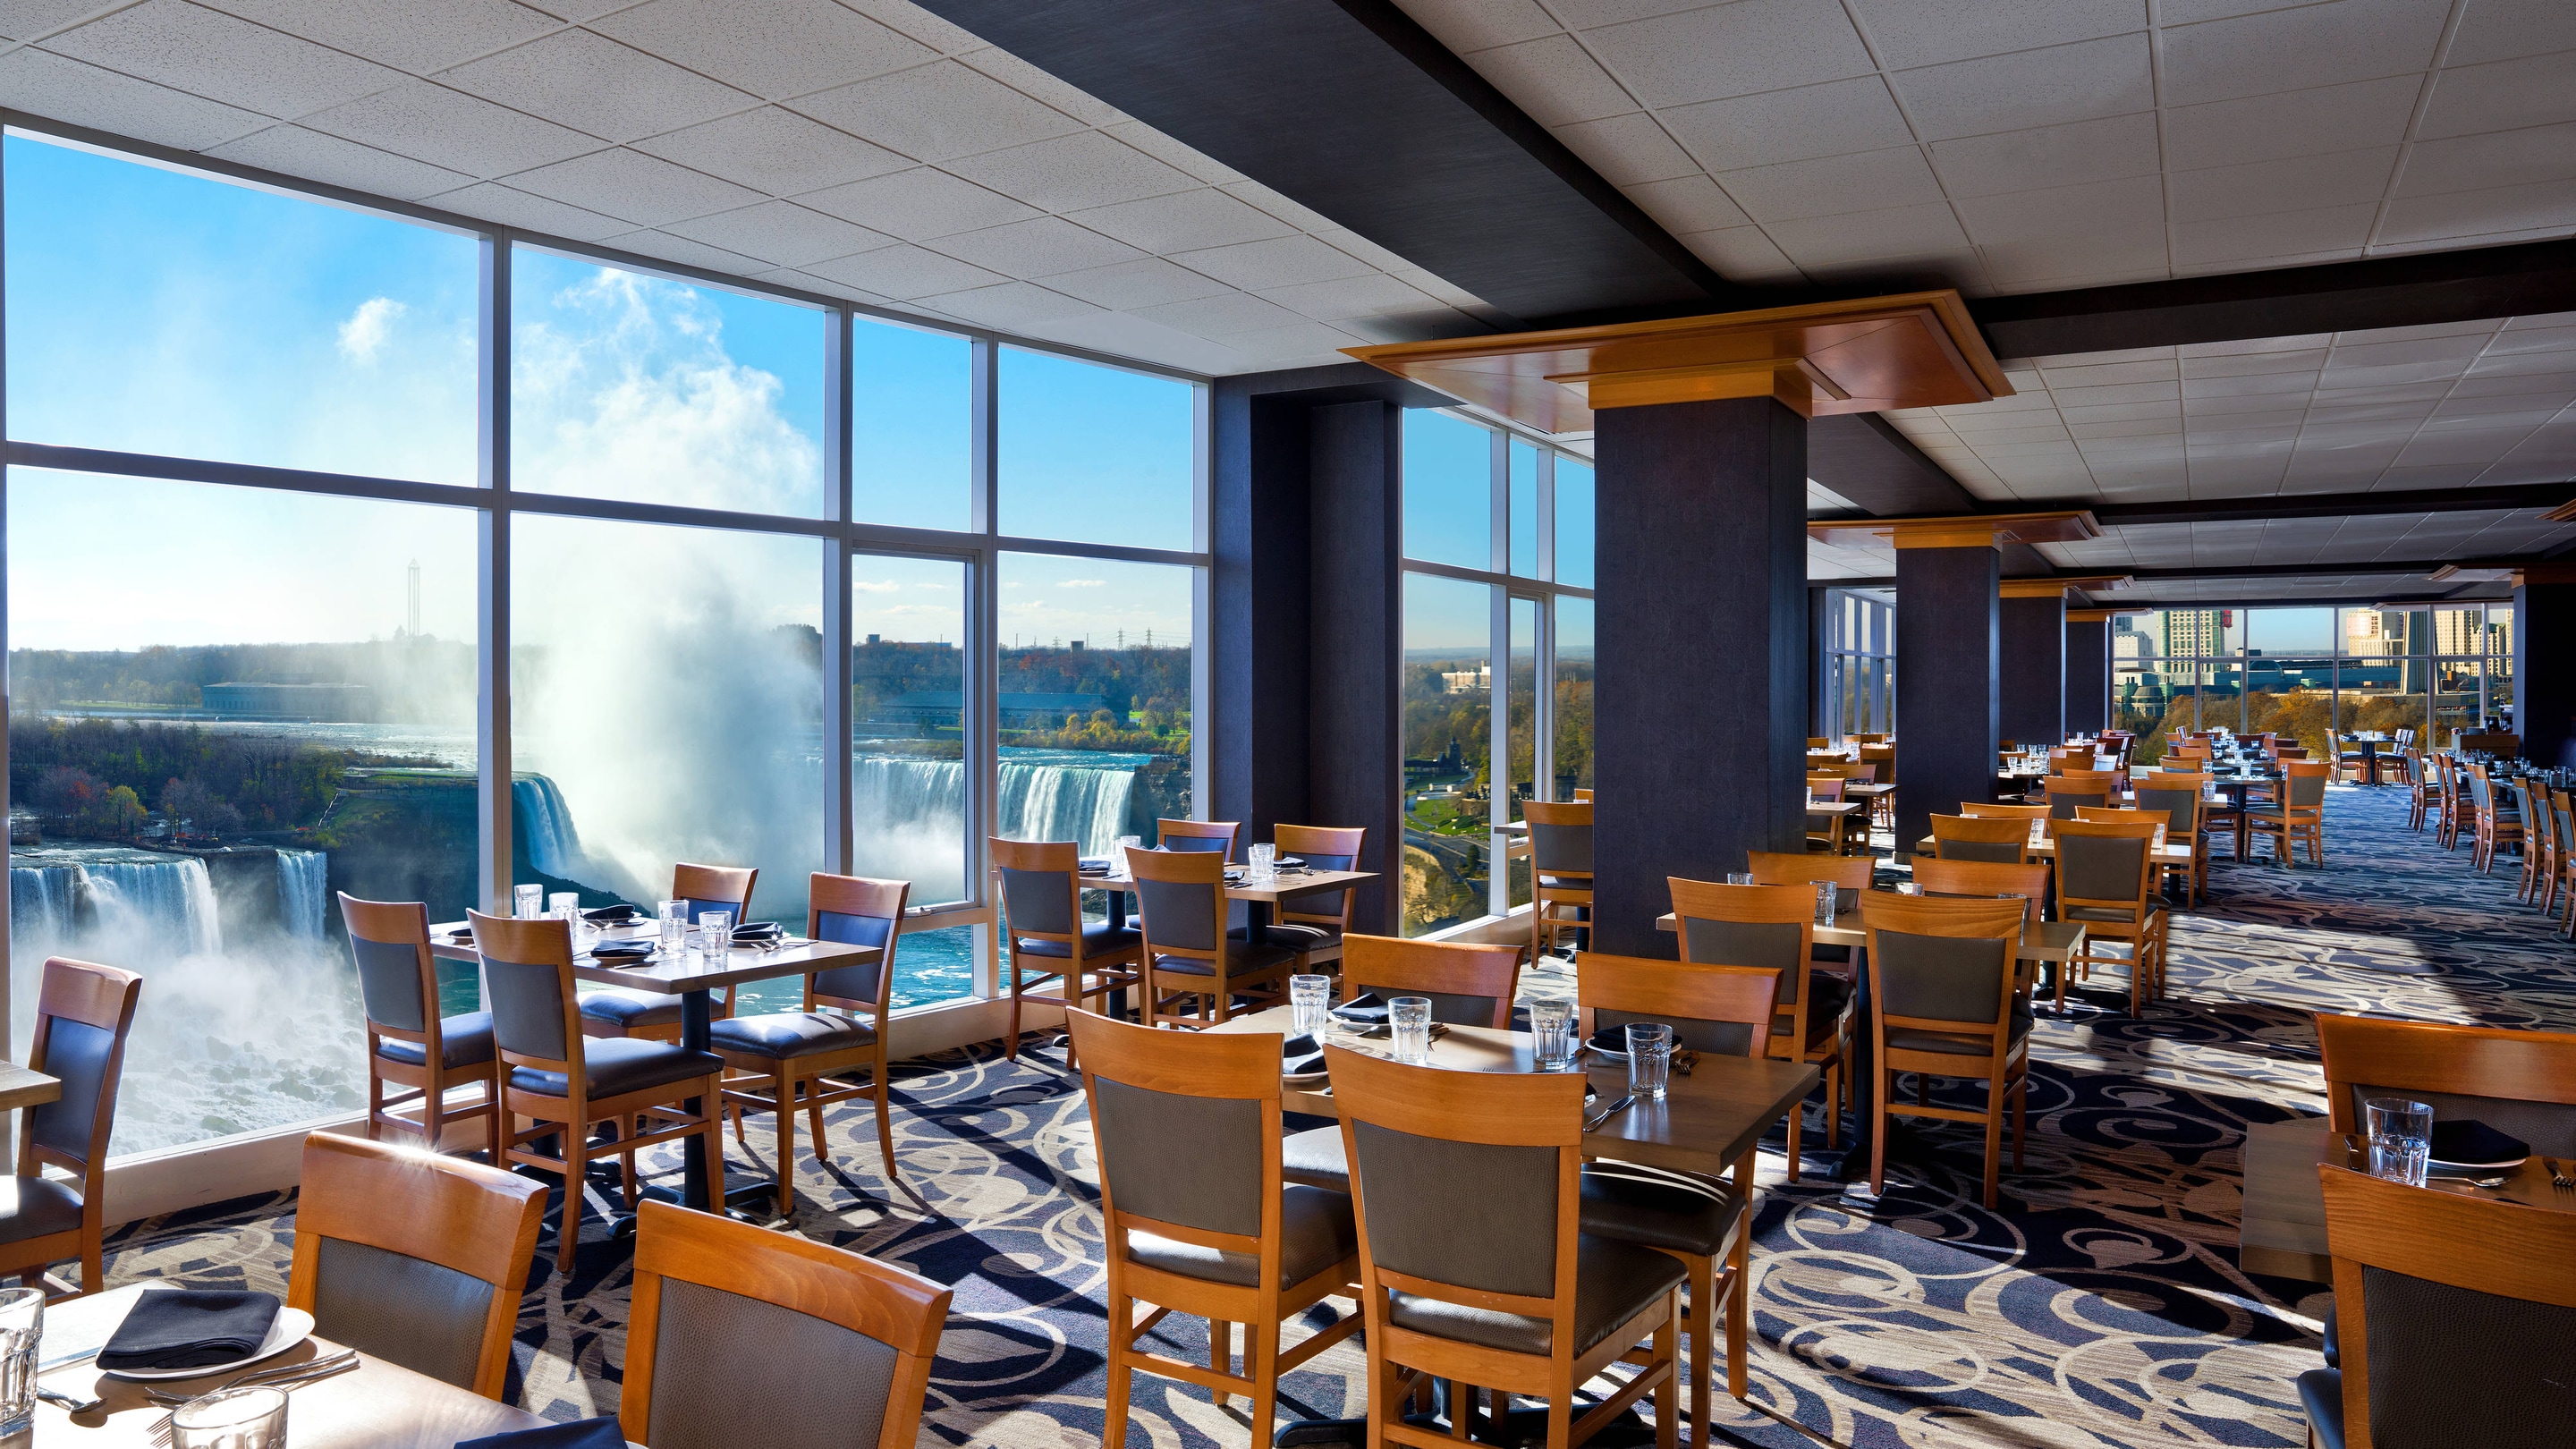 Restaruant with tables and chairs next to windows showing Niagara Falls.